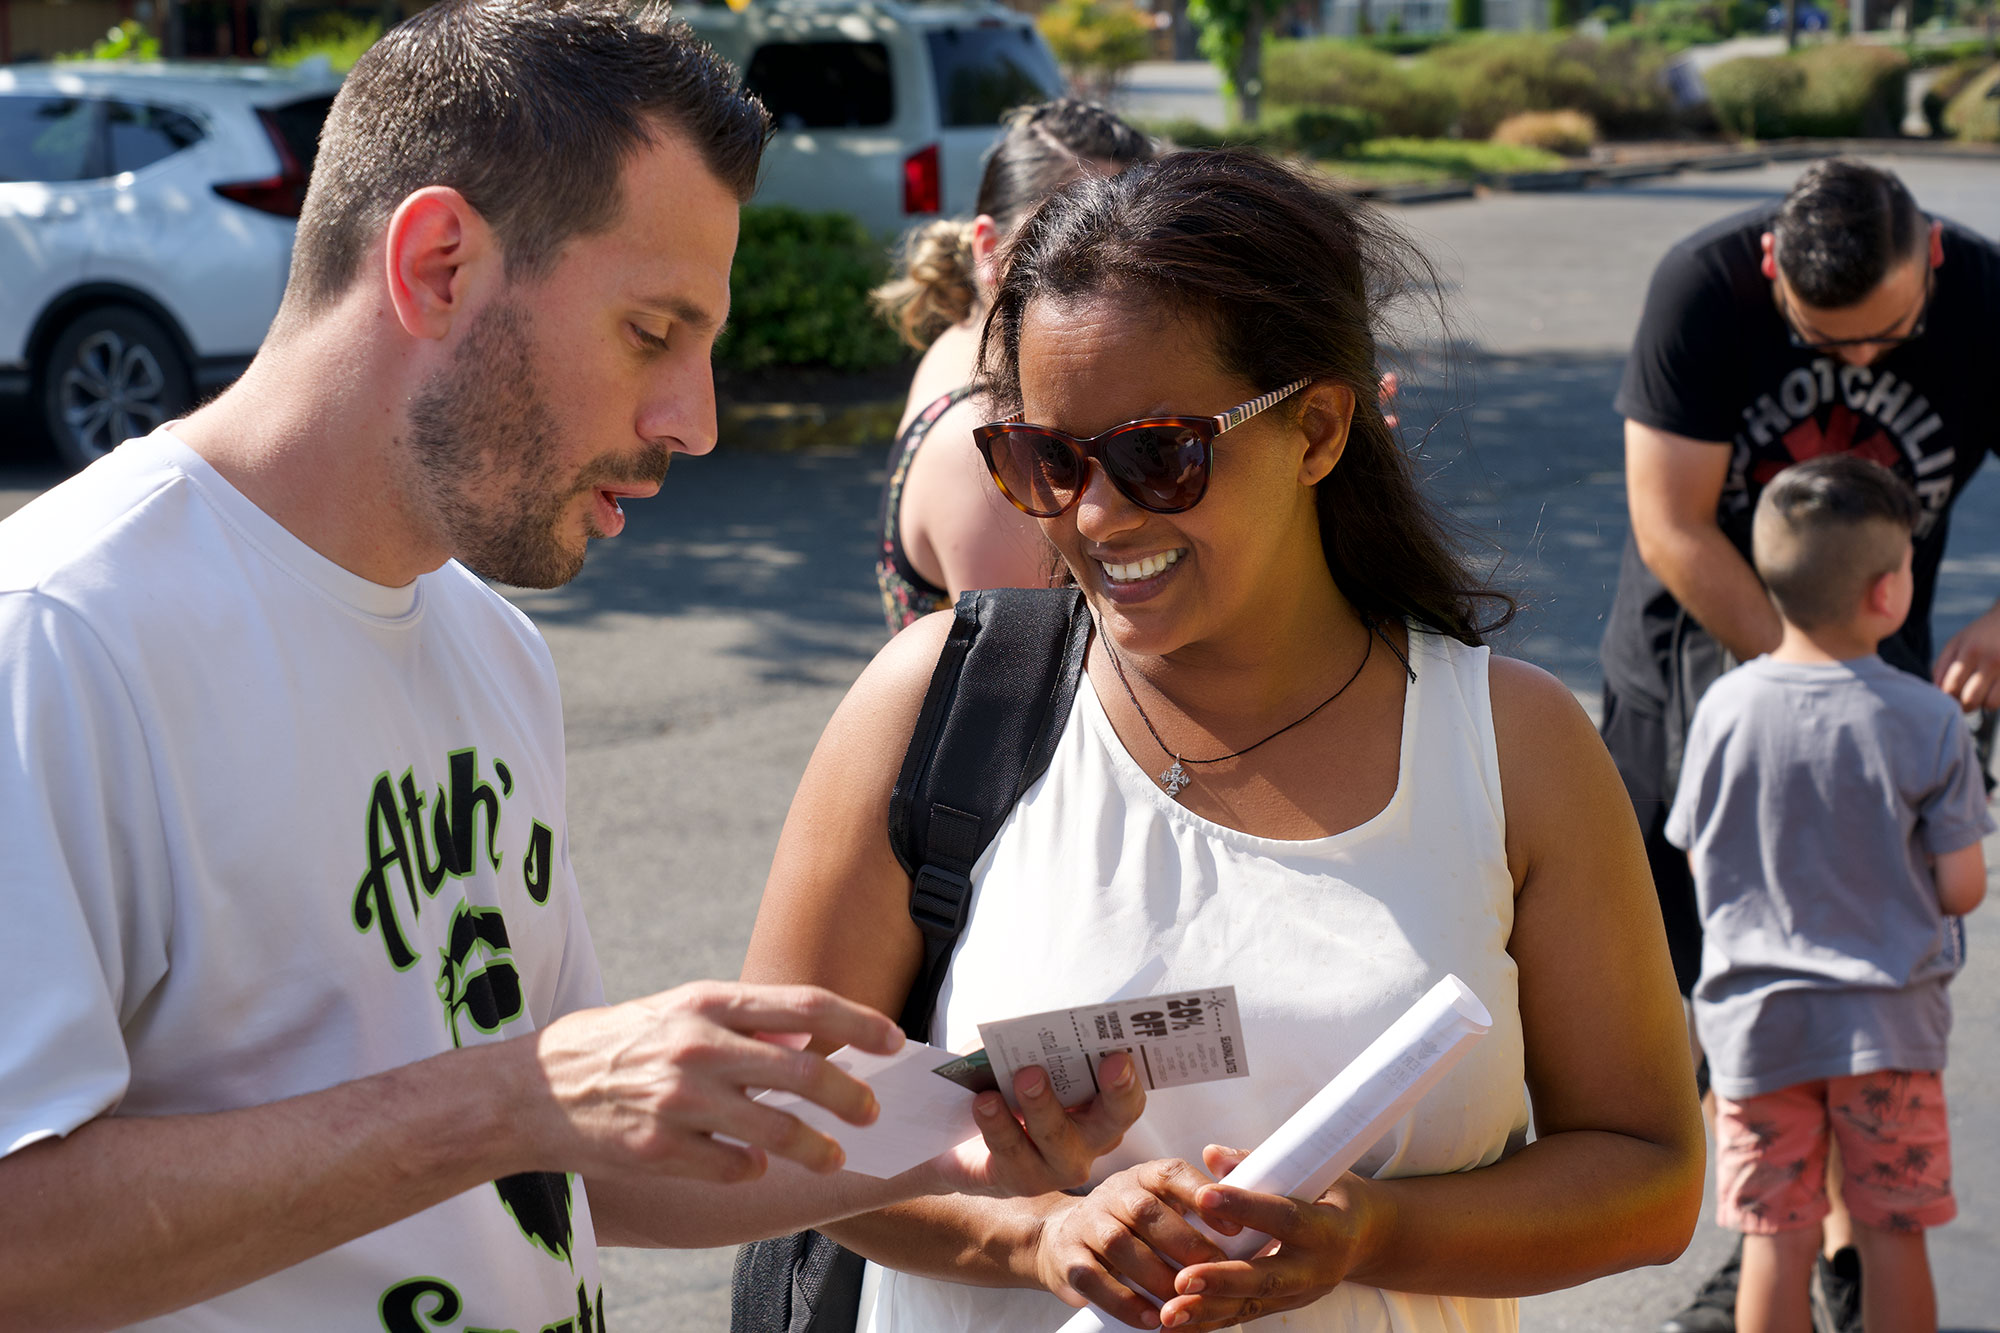 Man in white t-shirt talking to a woman with sunglasses and showing her a card